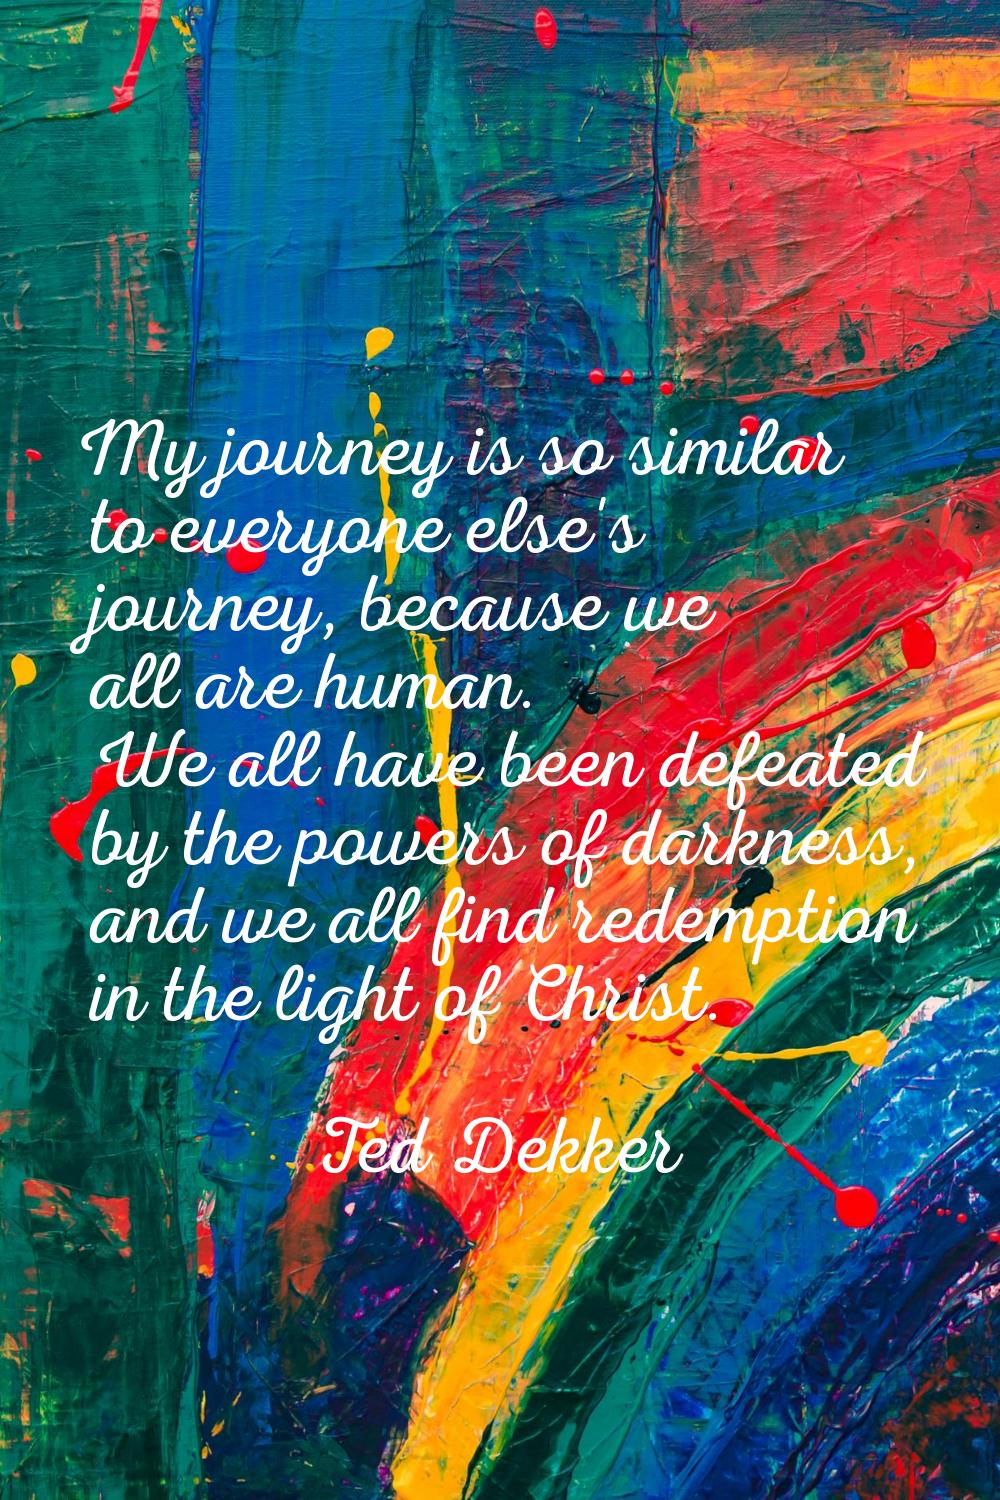 My journey is so similar to everyone else's journey, because we all are human. We all have been def